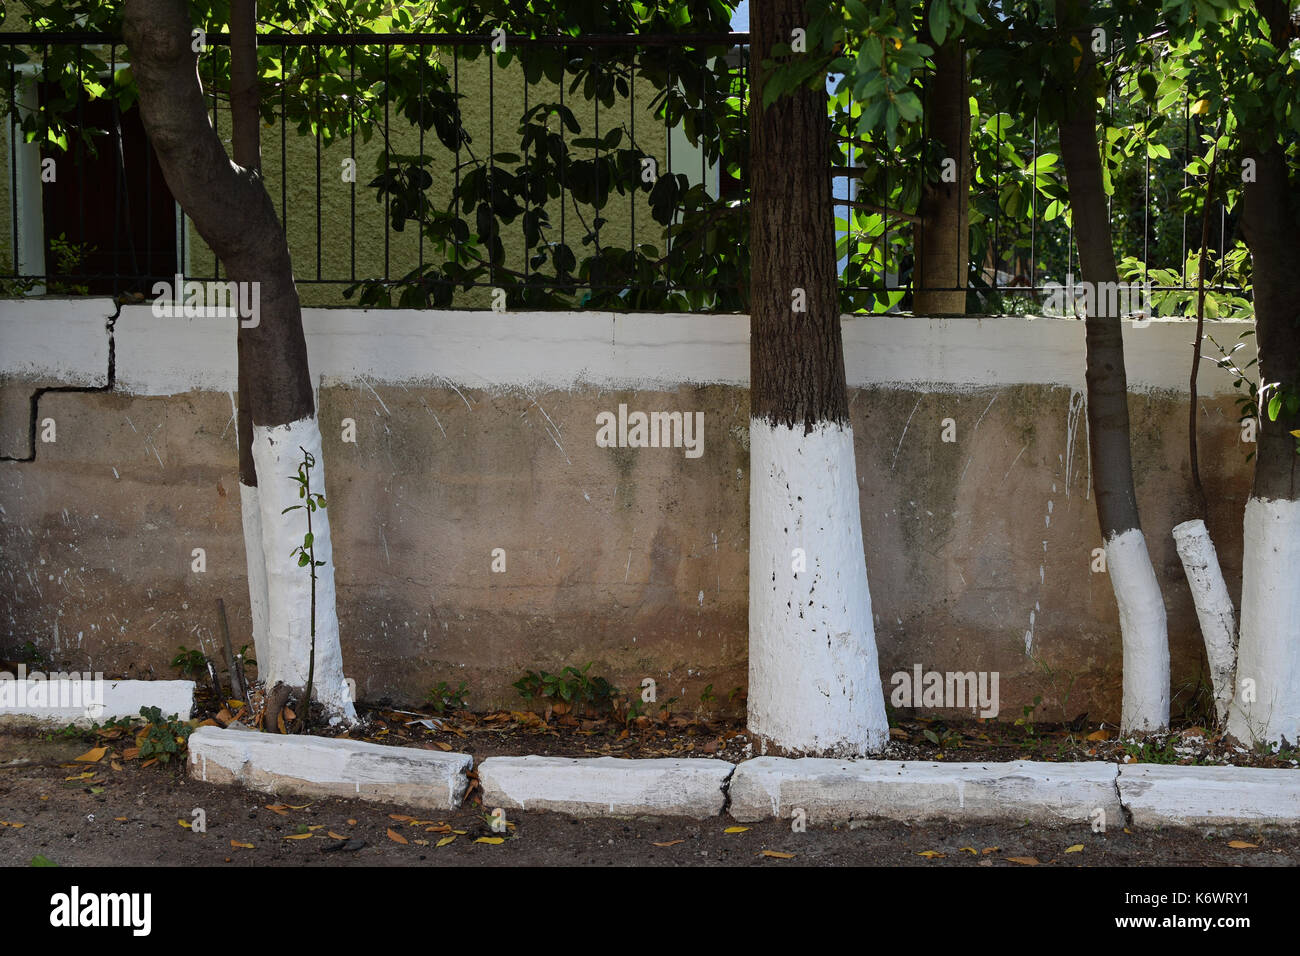 Whitewashed sidewalk garden tree trunks and fence painted white with limestone. Traditional narrow street in Athens, Greece. Stock Photo